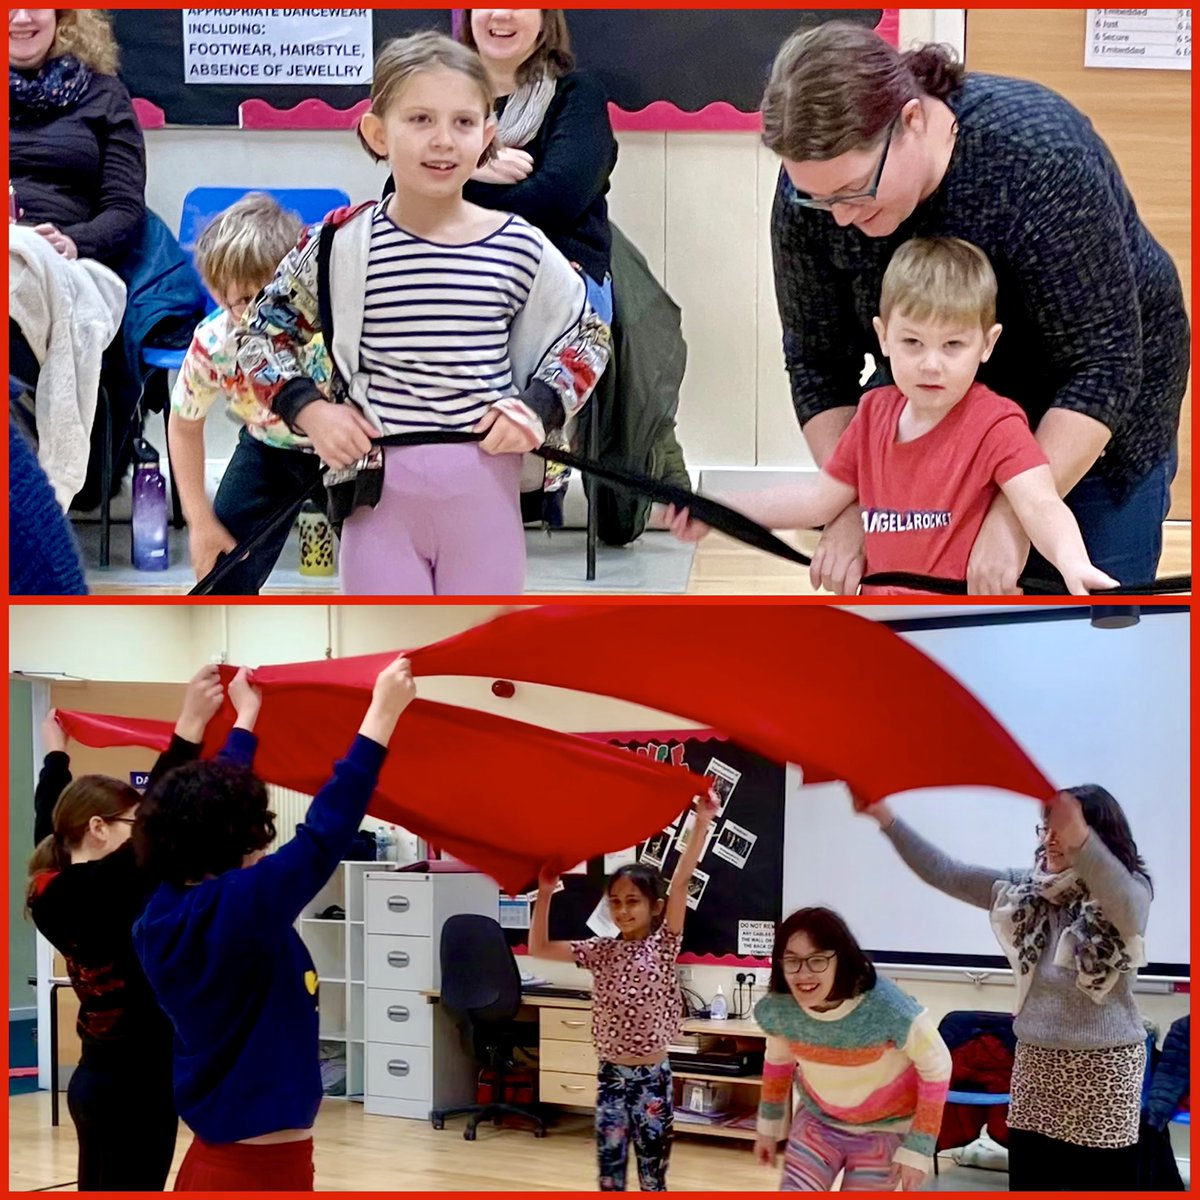 February…smiles, stretches, scarves & silliness! 🤭❤️🖤
#AbilitySchoolofDance #ASofD #Dance #DanceClass #InclusiveDance #AccessibleDance #AdditionalNeeds #Disabled #DisabledDance #Disability #AutismMovementTherapy #Autism #Autistic #Neurodiversity #Neurodivergence #Wellbeing